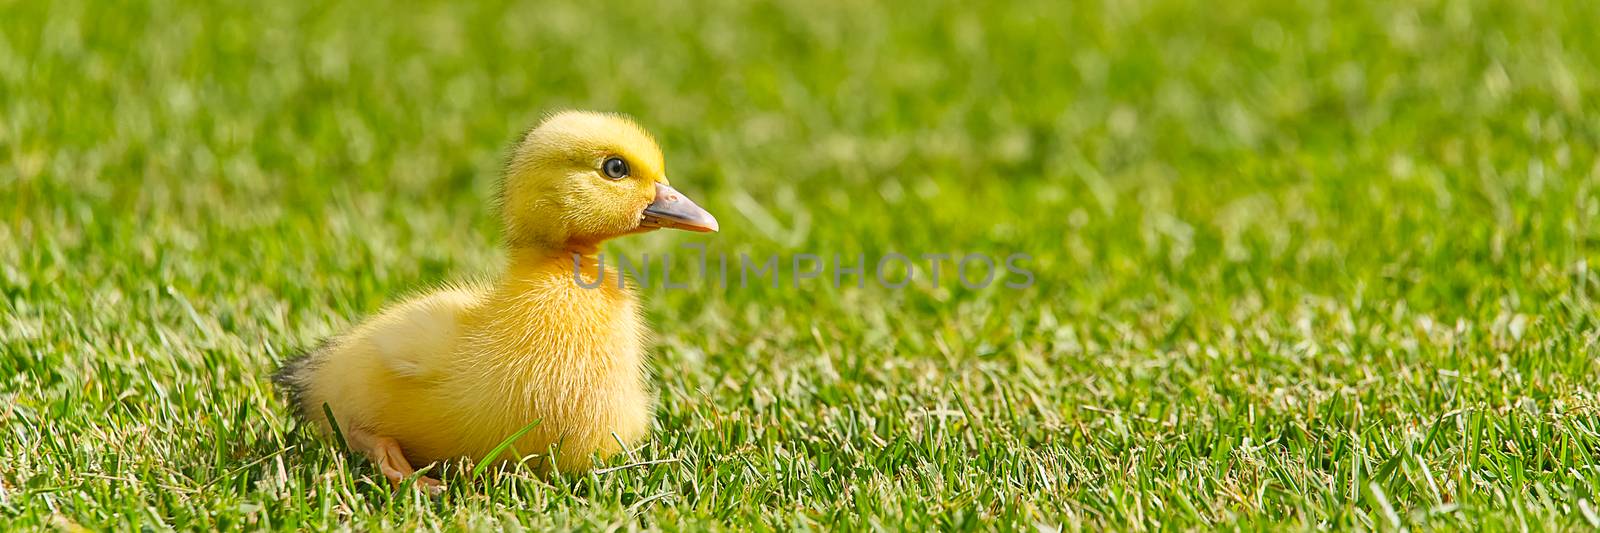 Small newborn ducklings walking on backyard on green grass. Yellow cute duckling running on meadow field in sunny day. Banner or panoramic shot with duck chick on grass